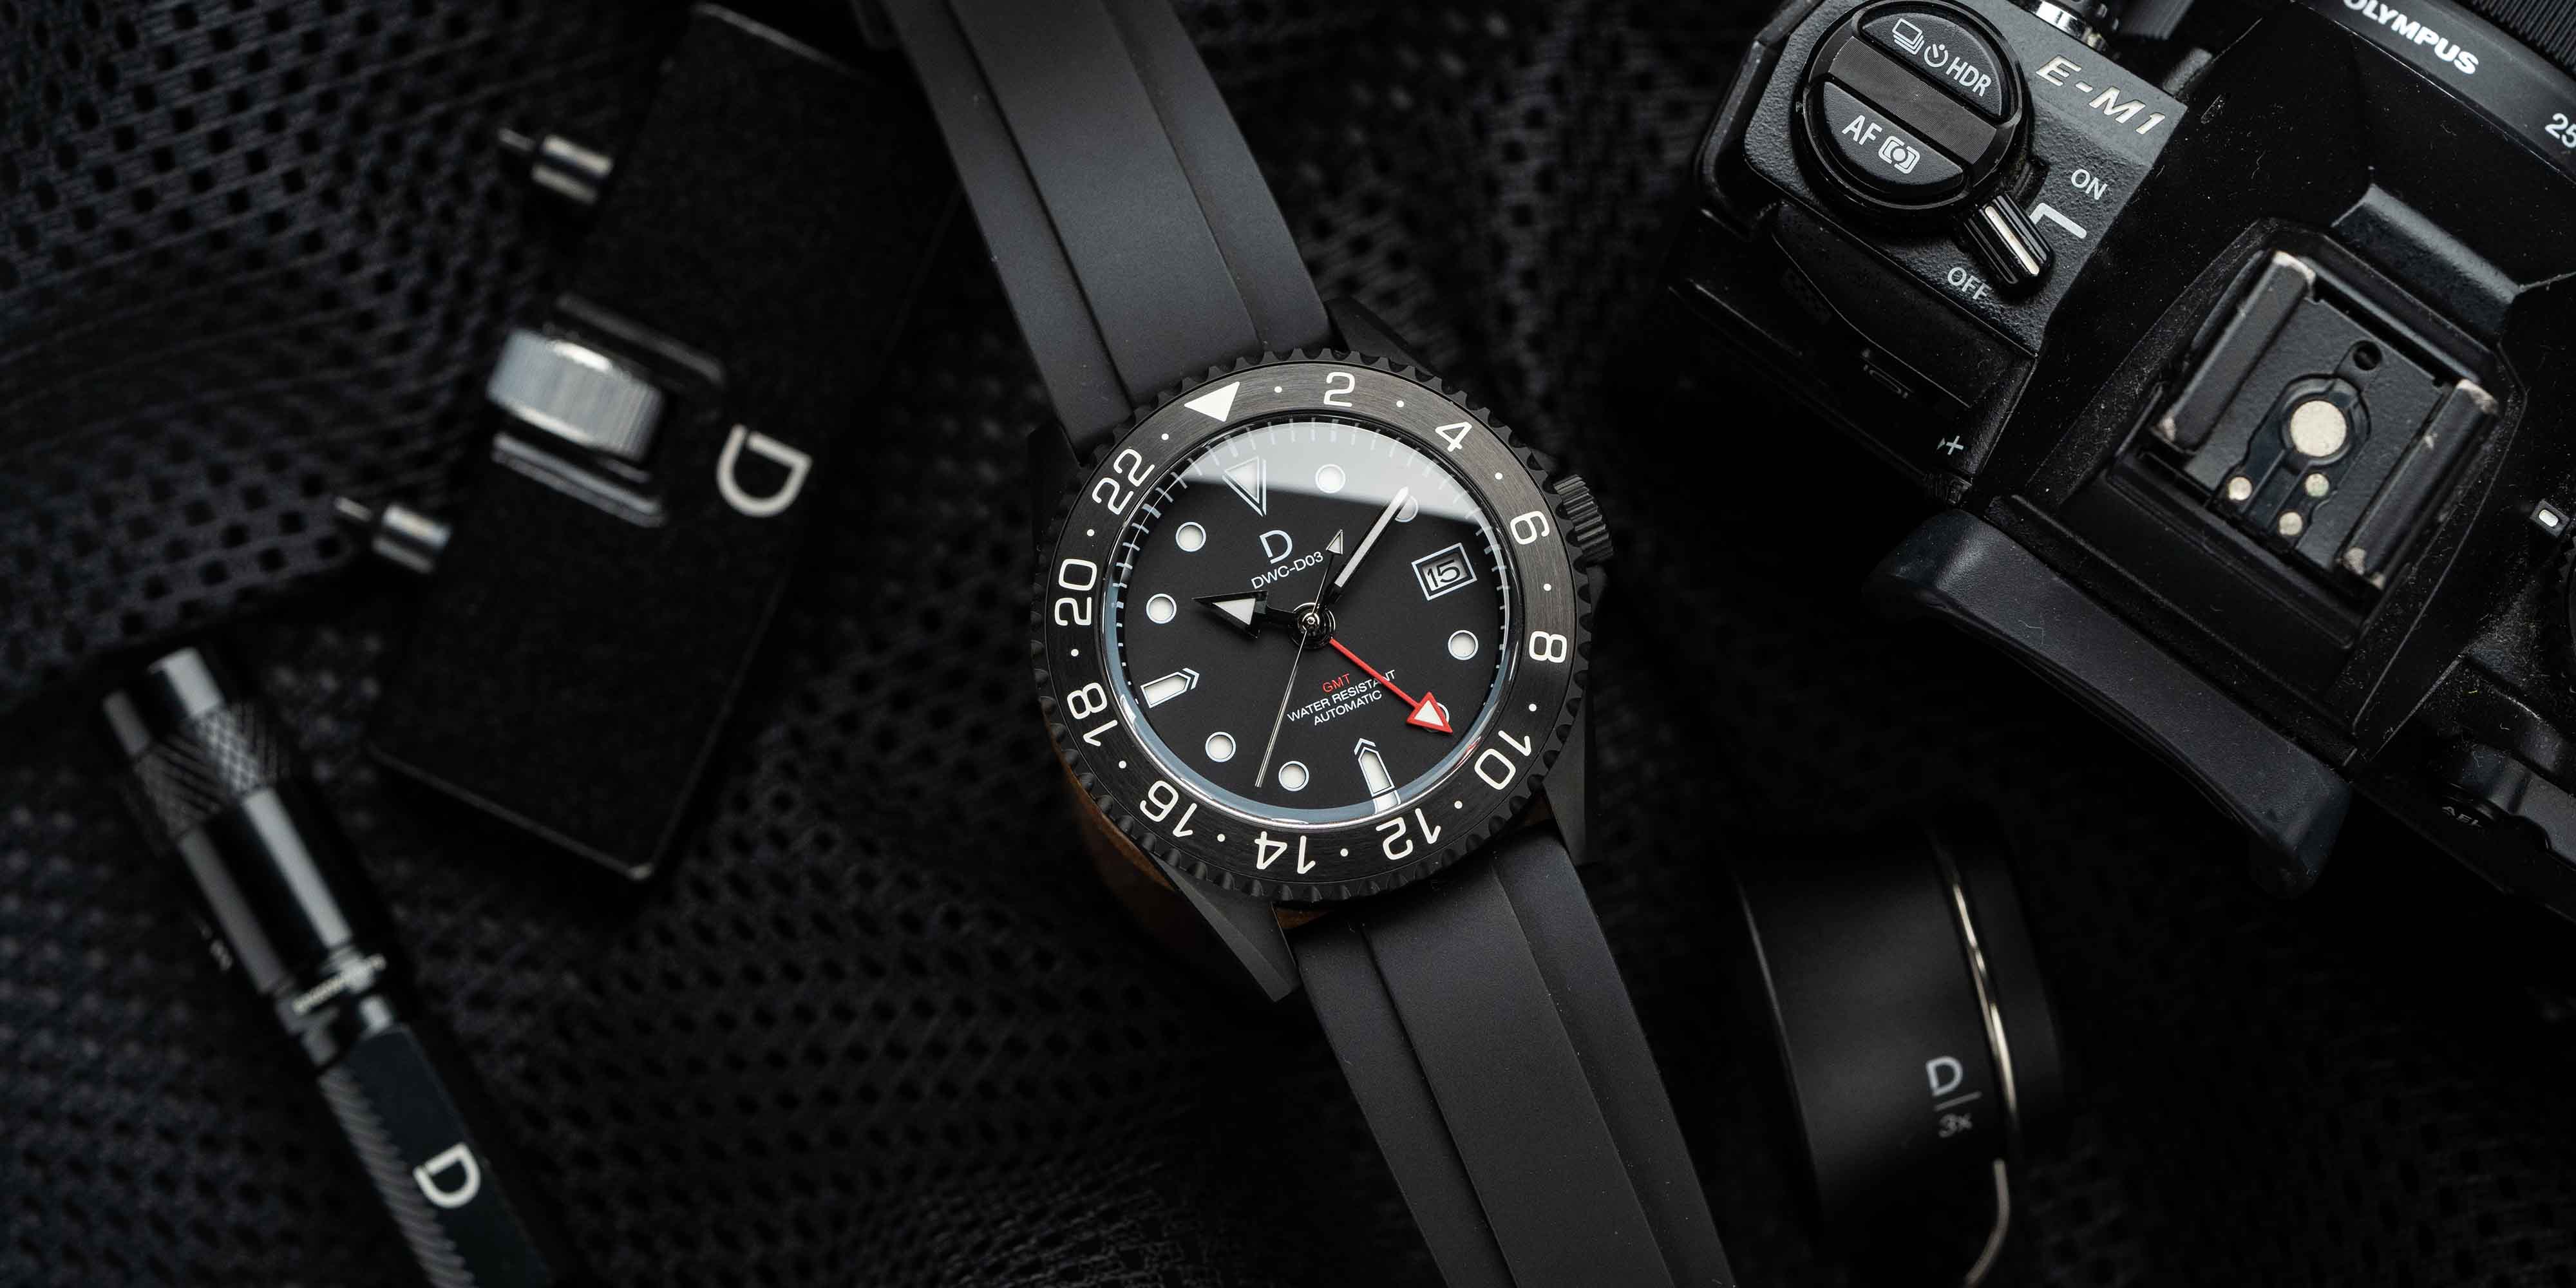 All black GMT automatic watch. PVD case, sapphire crystals, Seiko GMT movement